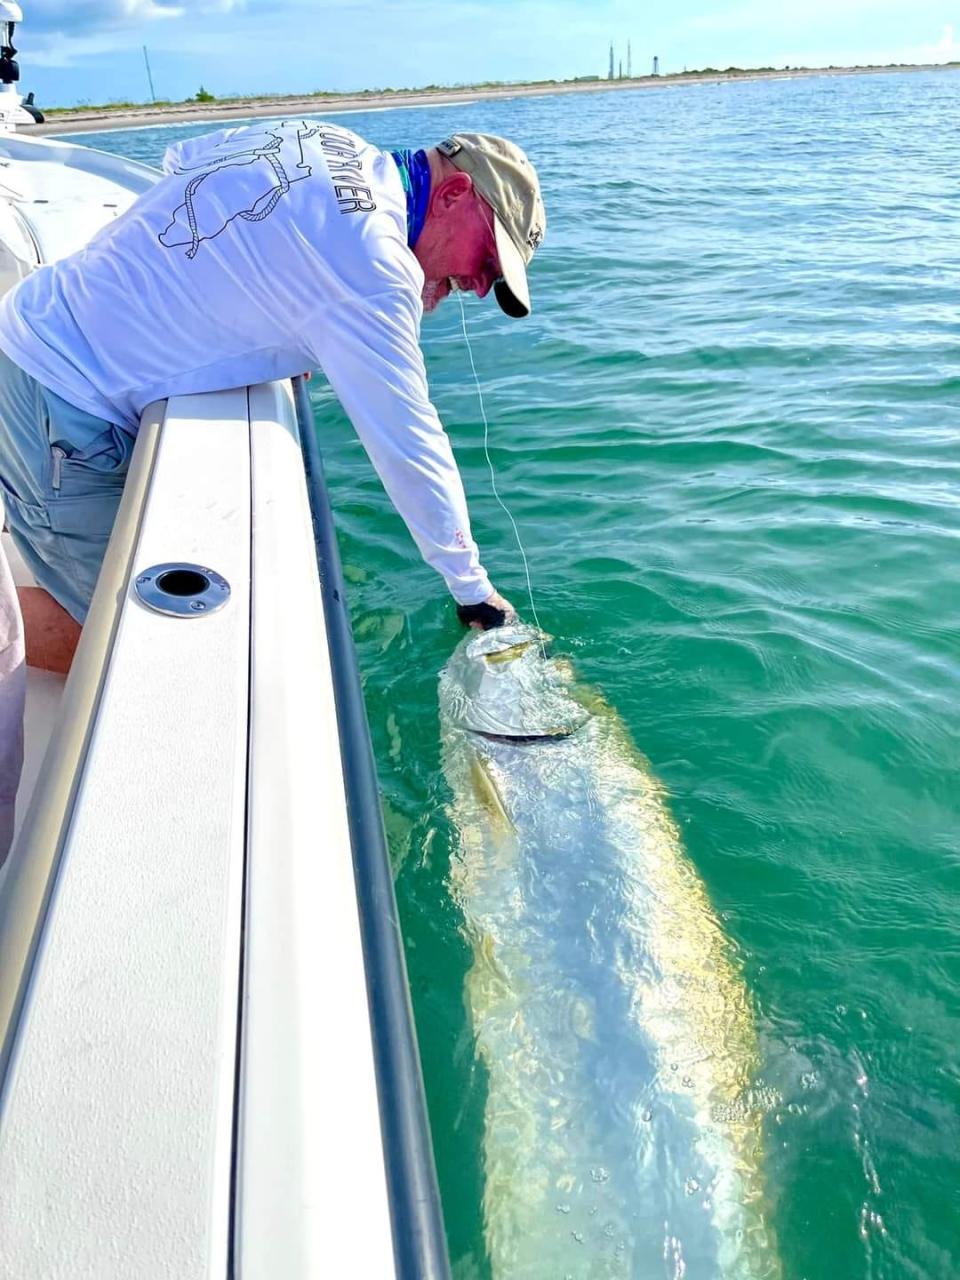 A client of Capt. Jon Lulay's enjoyed catching and releasing tarpon off the beach on Aug. 22, 2022.